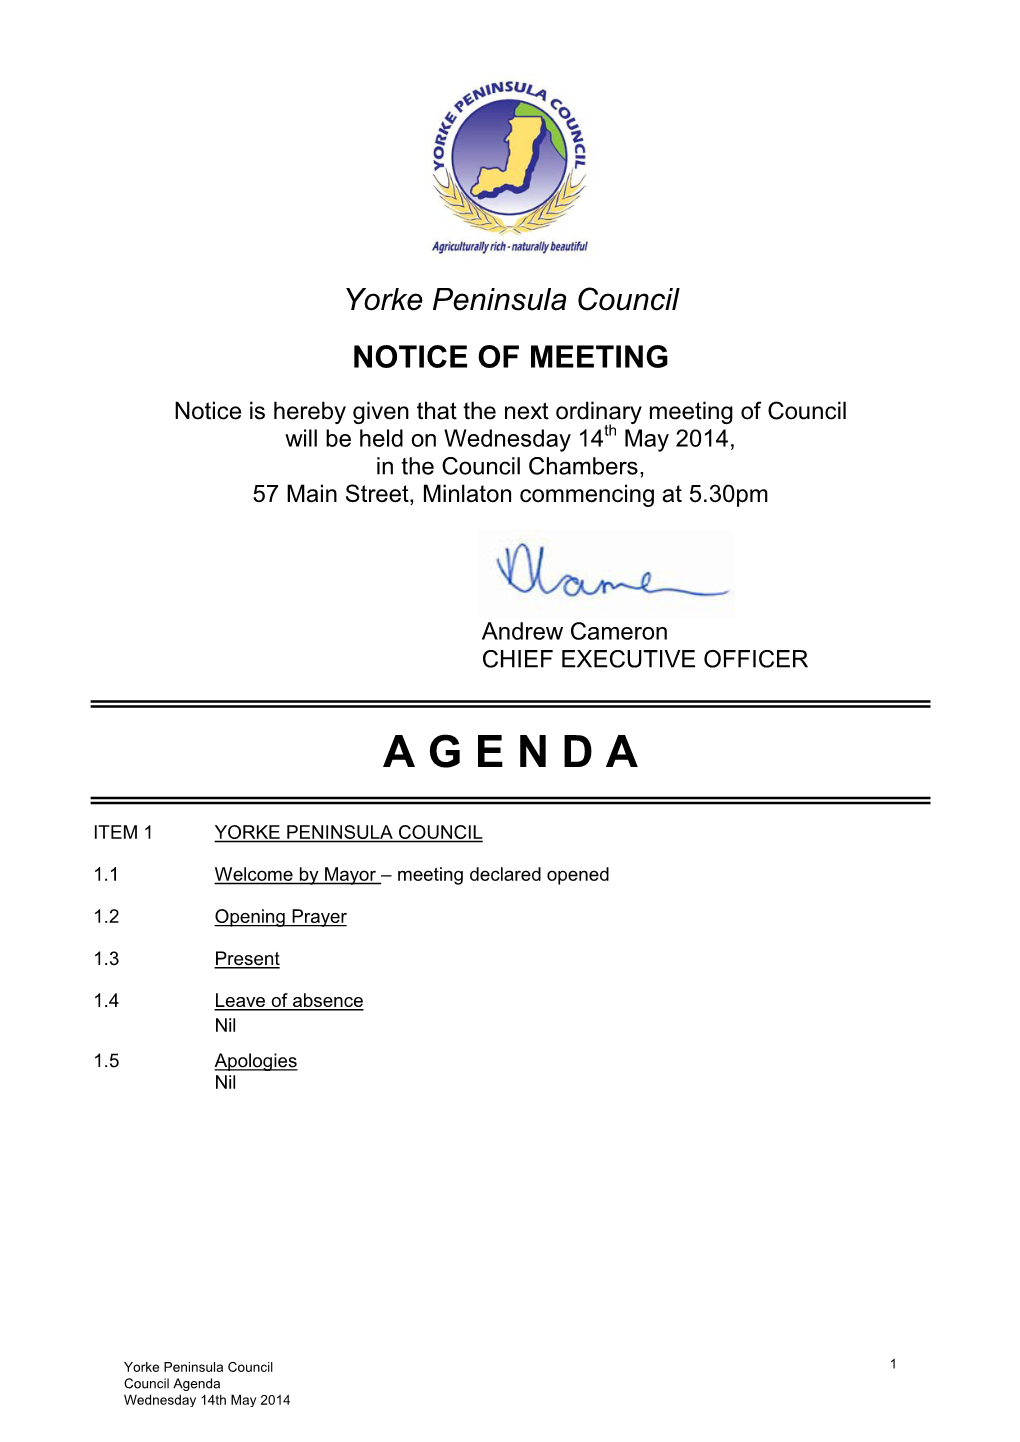 Council Agenda Wednesday 14Th May 2014 1.6 Conflict of Interest